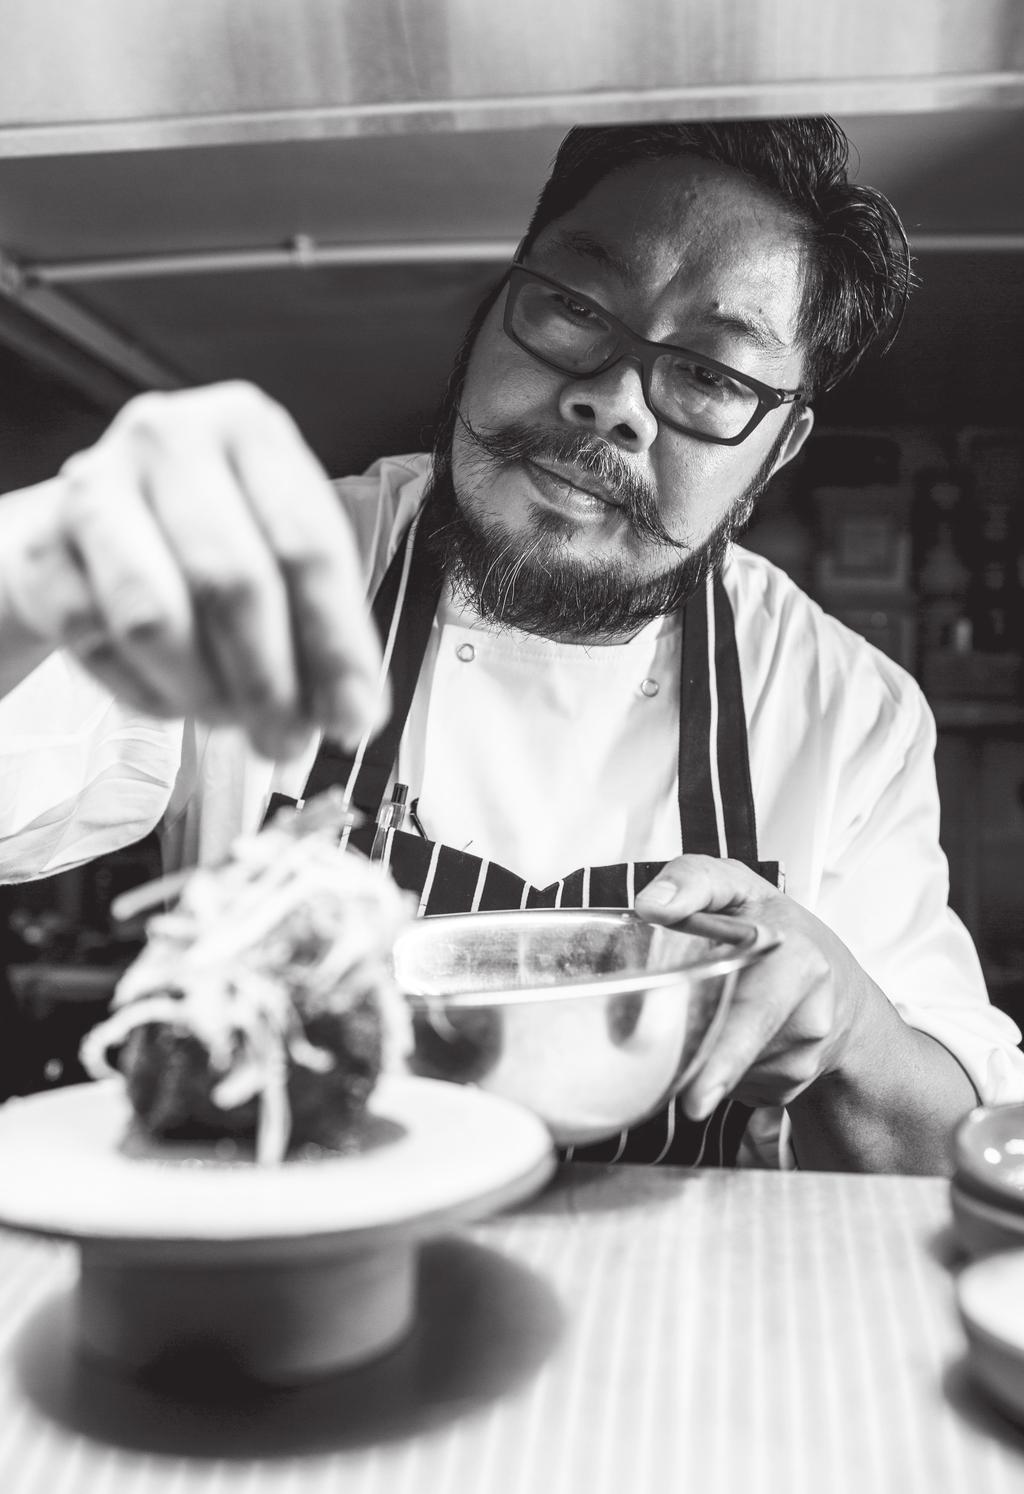 Our Head Chef Jonathan Villar has created his own sensational versions of iconic East Asian dishes served as smaller, tapas-style sharers for a more relaxed dining experience.